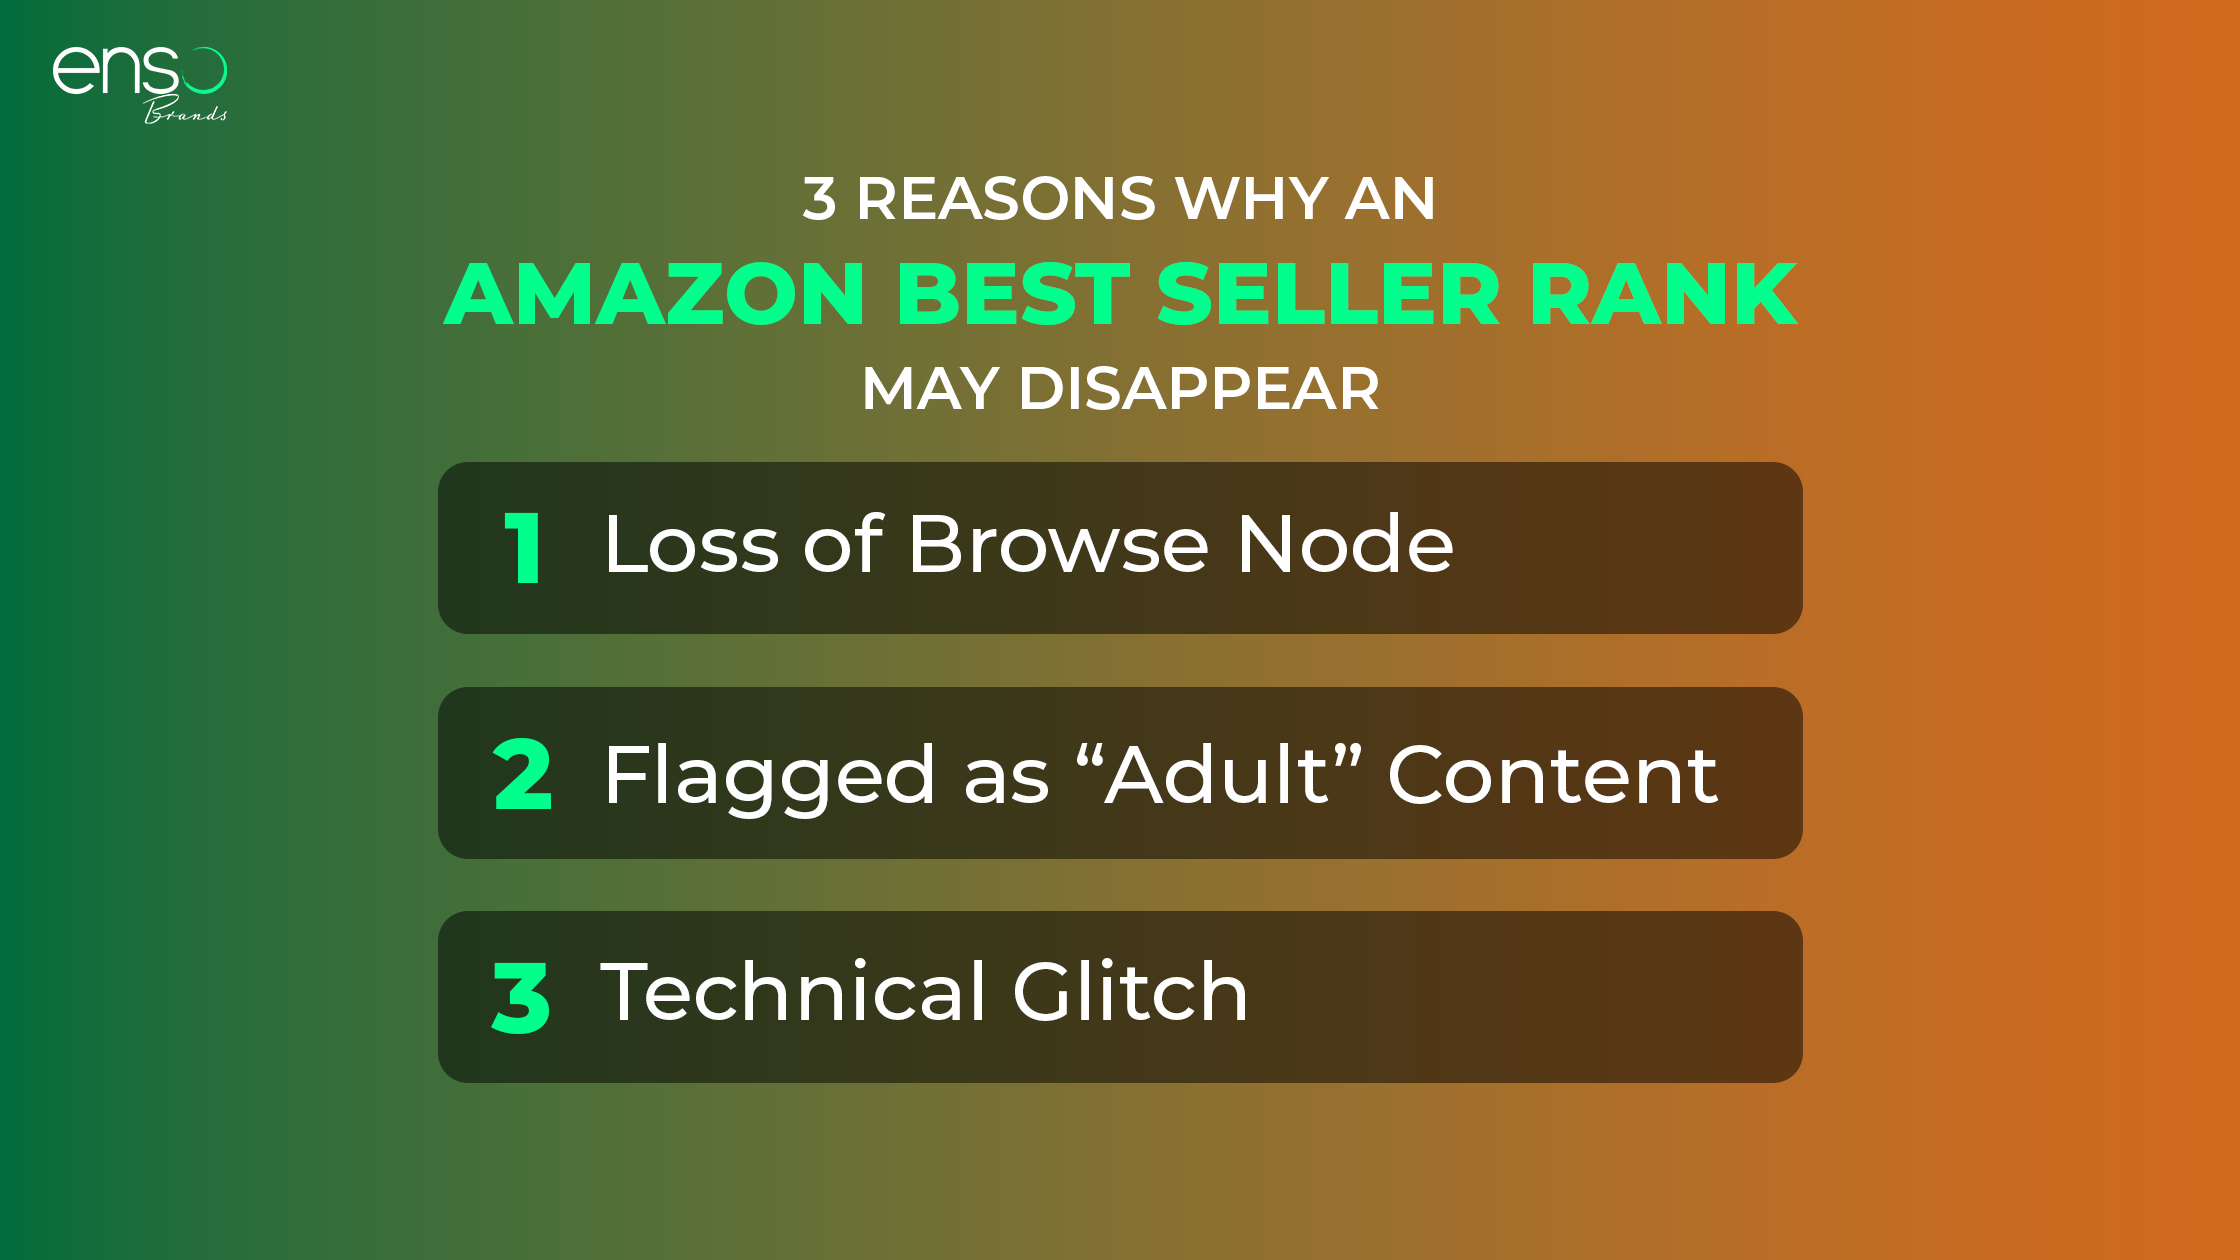 Reasons why your Amazon Best Seller Rank May Disappear